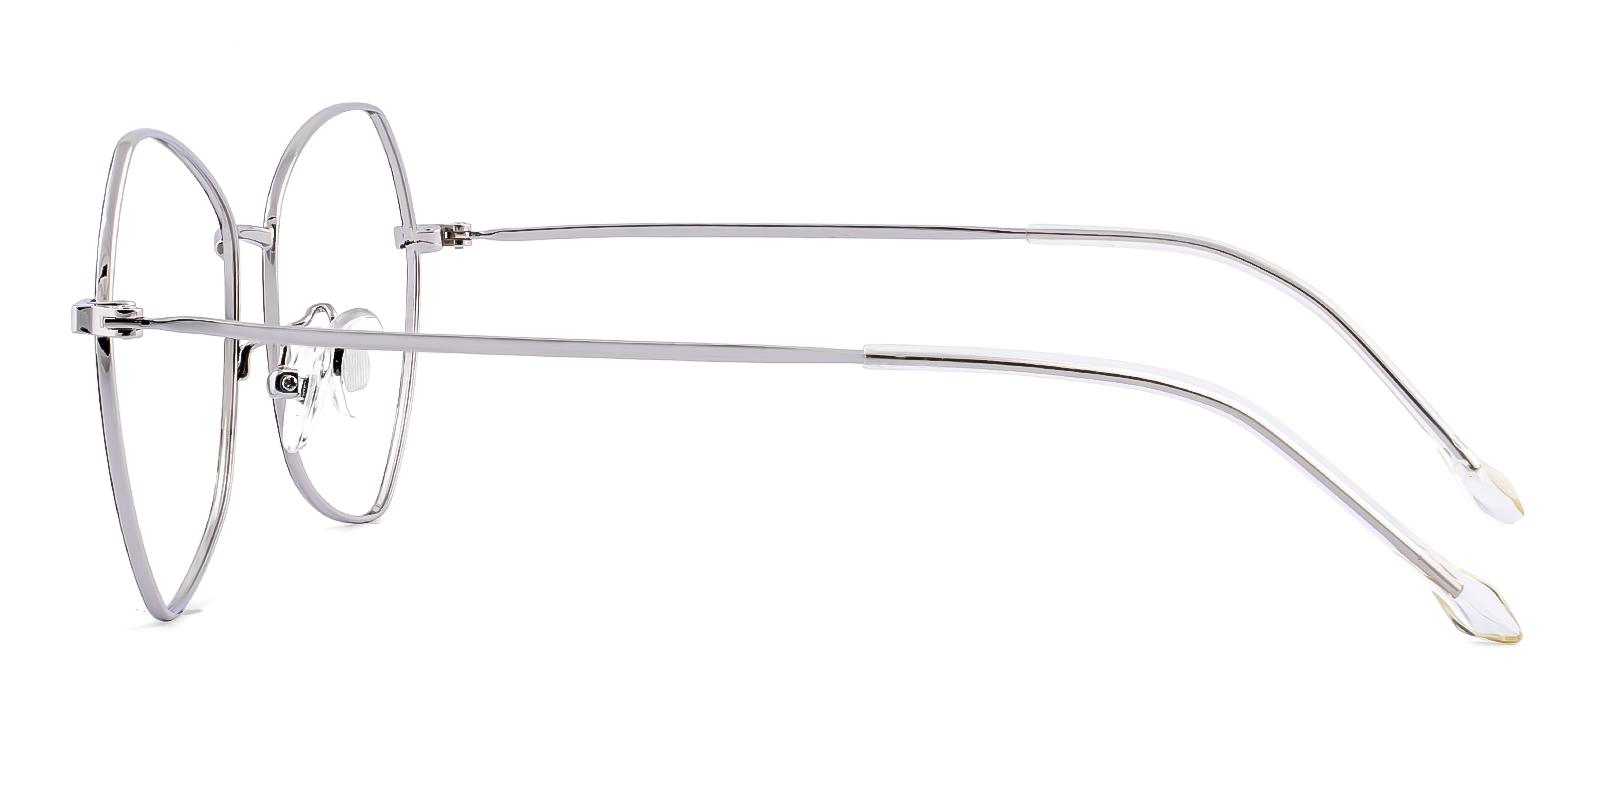 Thellet Silver Metal Eyeglasses , NosePads Frames from ABBE Glasses